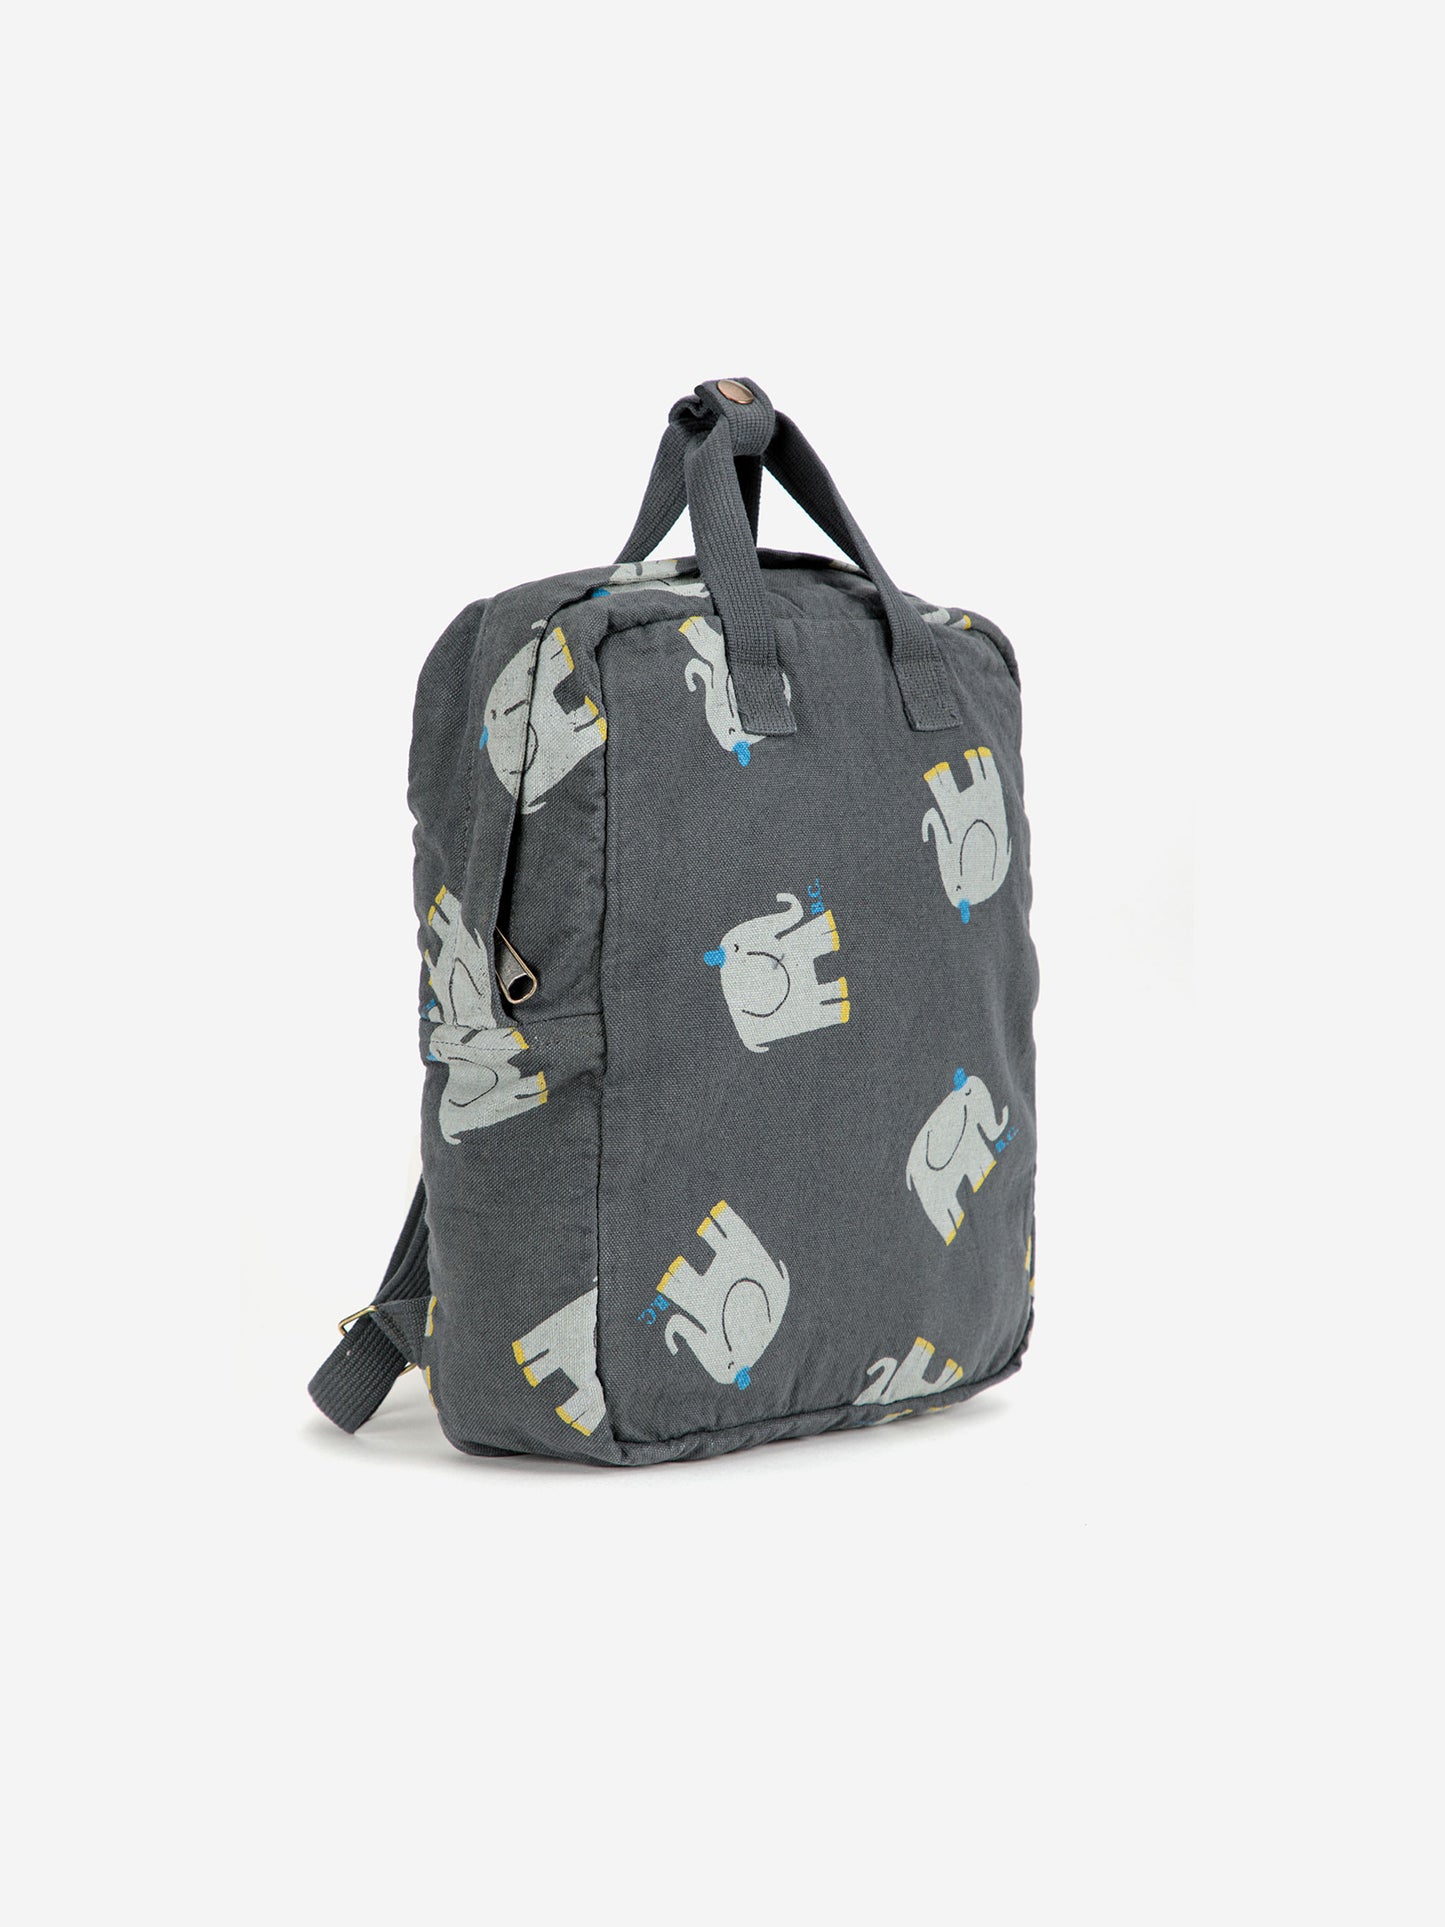 The Elefant all over schoolbag